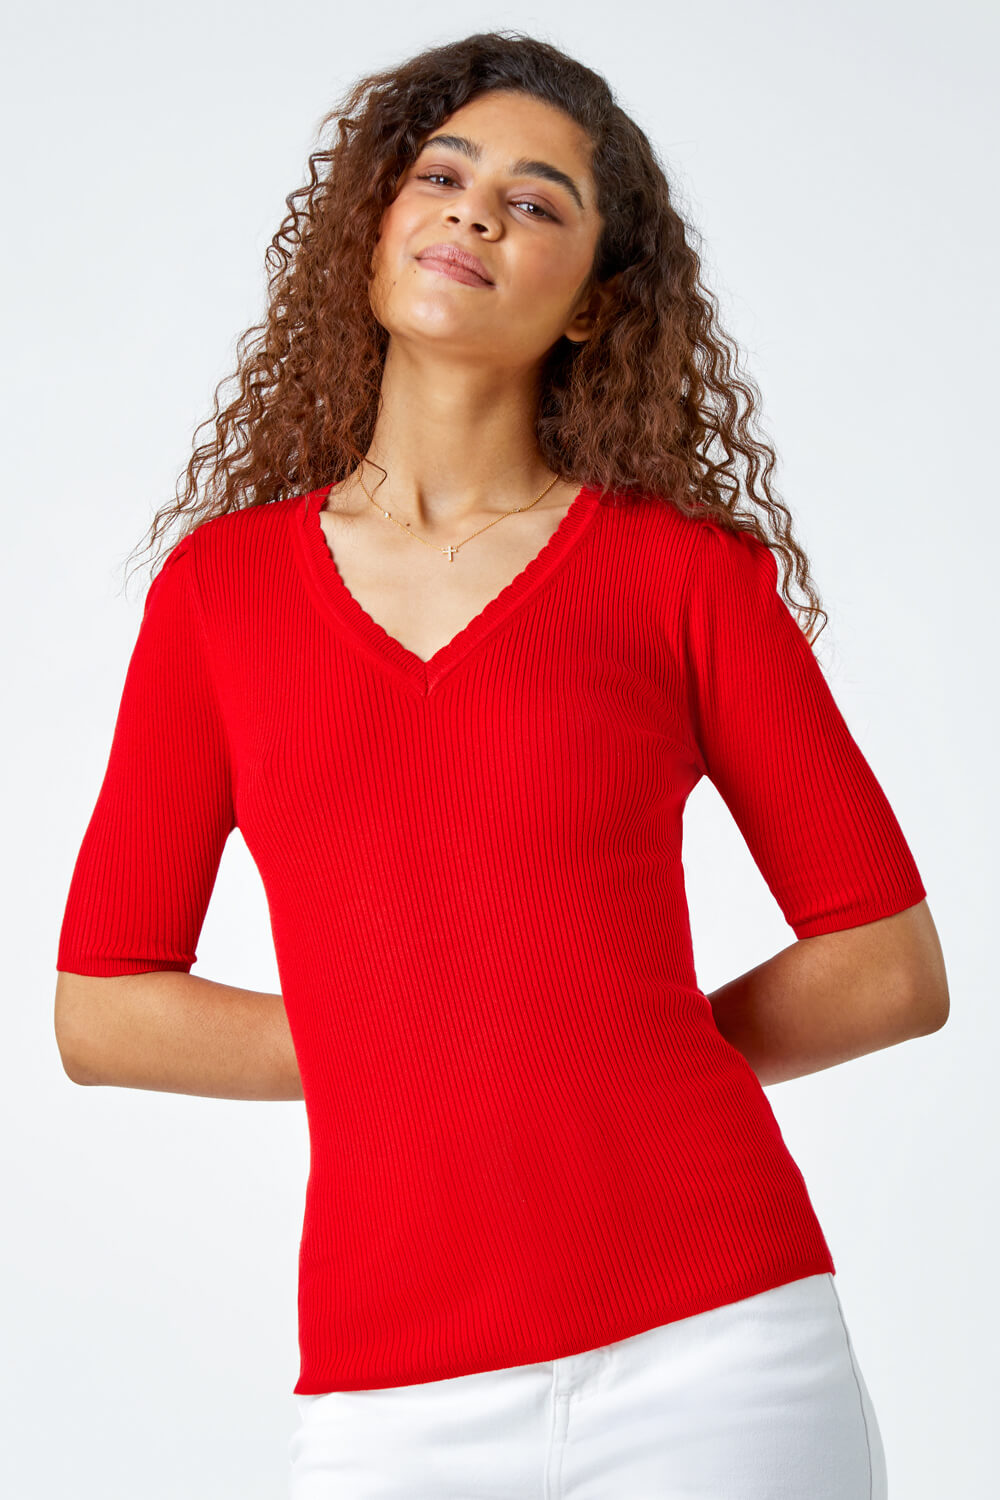 Red Scallop Edge Ribbed Stretch Knit Top, Image 2 of 5